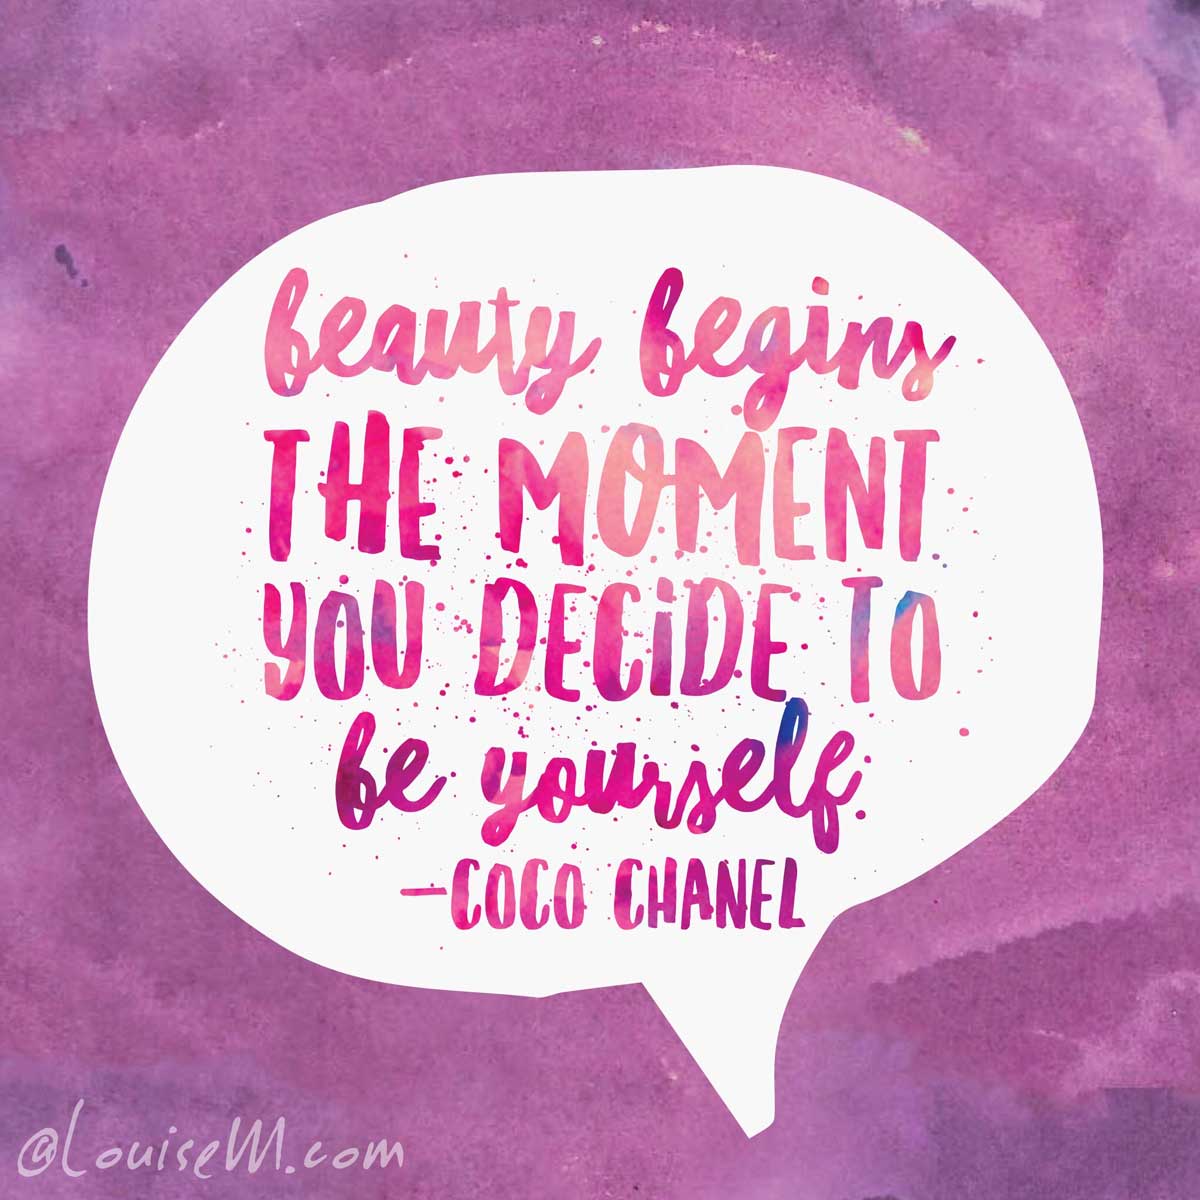 purple painted background with coco chanel quote on being yourself.